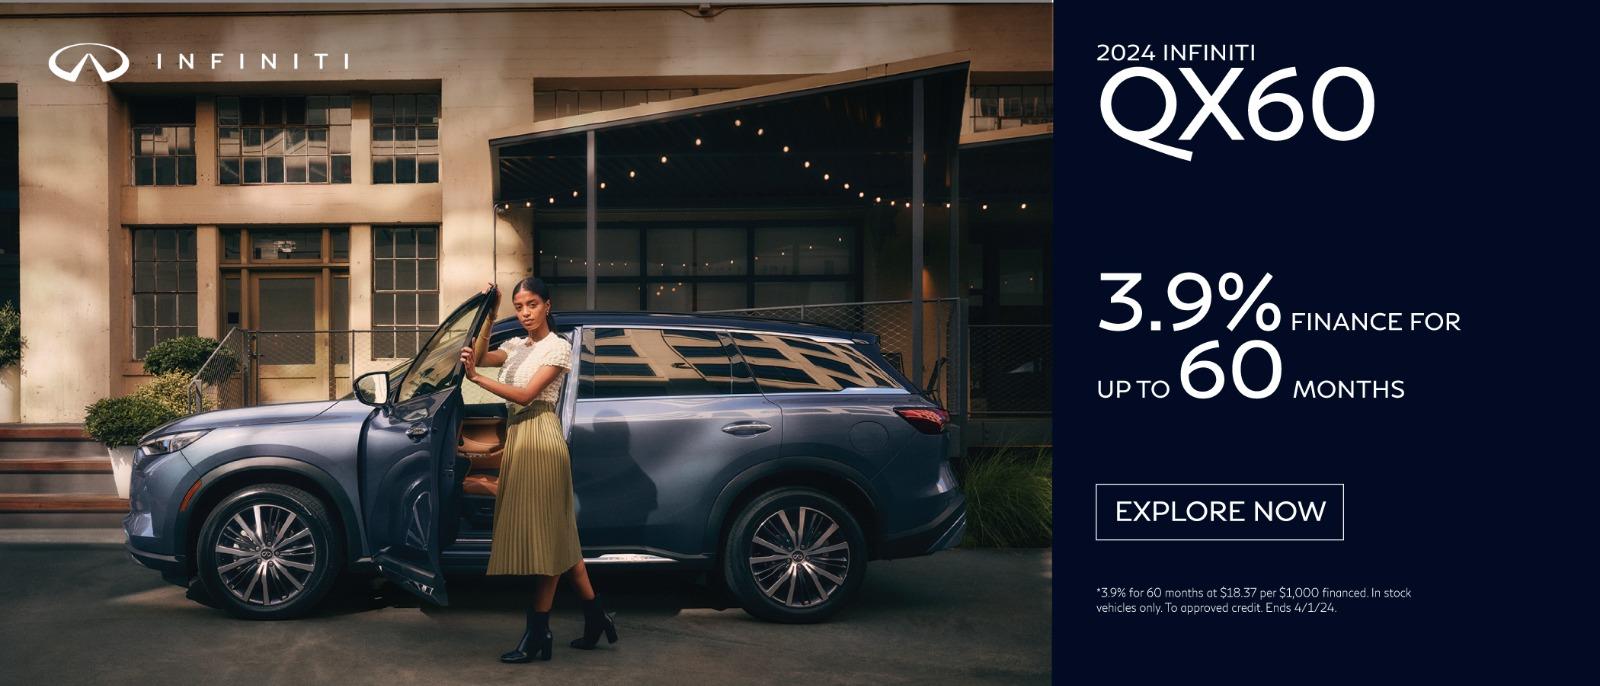 2023 INFINITI QX60 3.9% Finance for up to 60 months